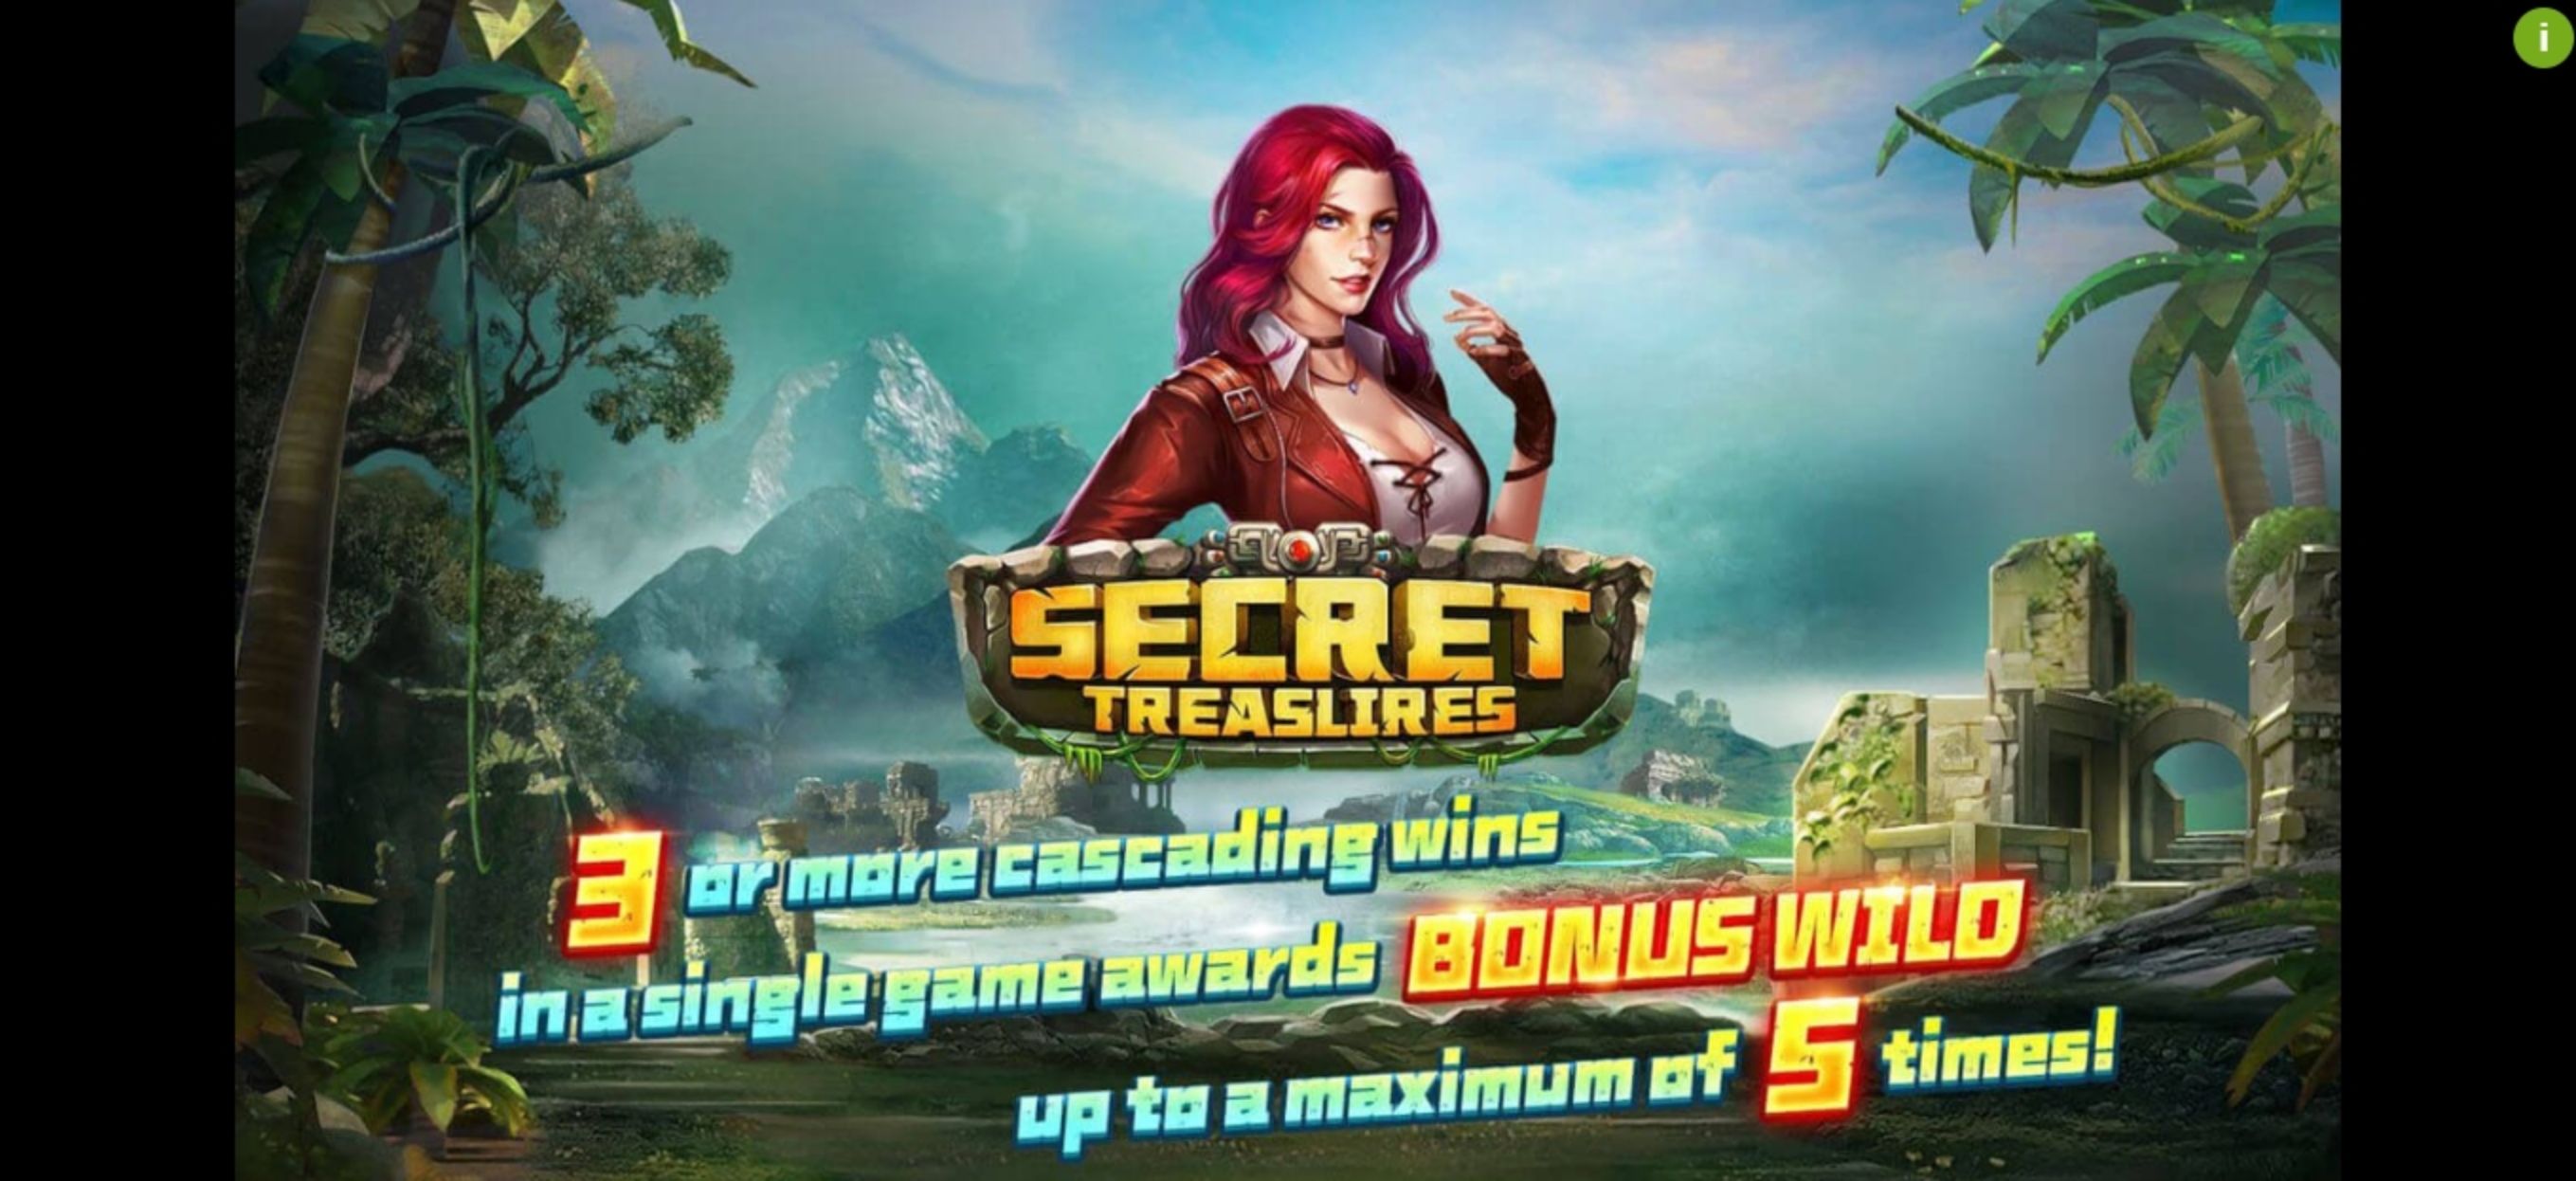 Play Secret Treasures Free Casino Slot Game by Dreamtech Gaming